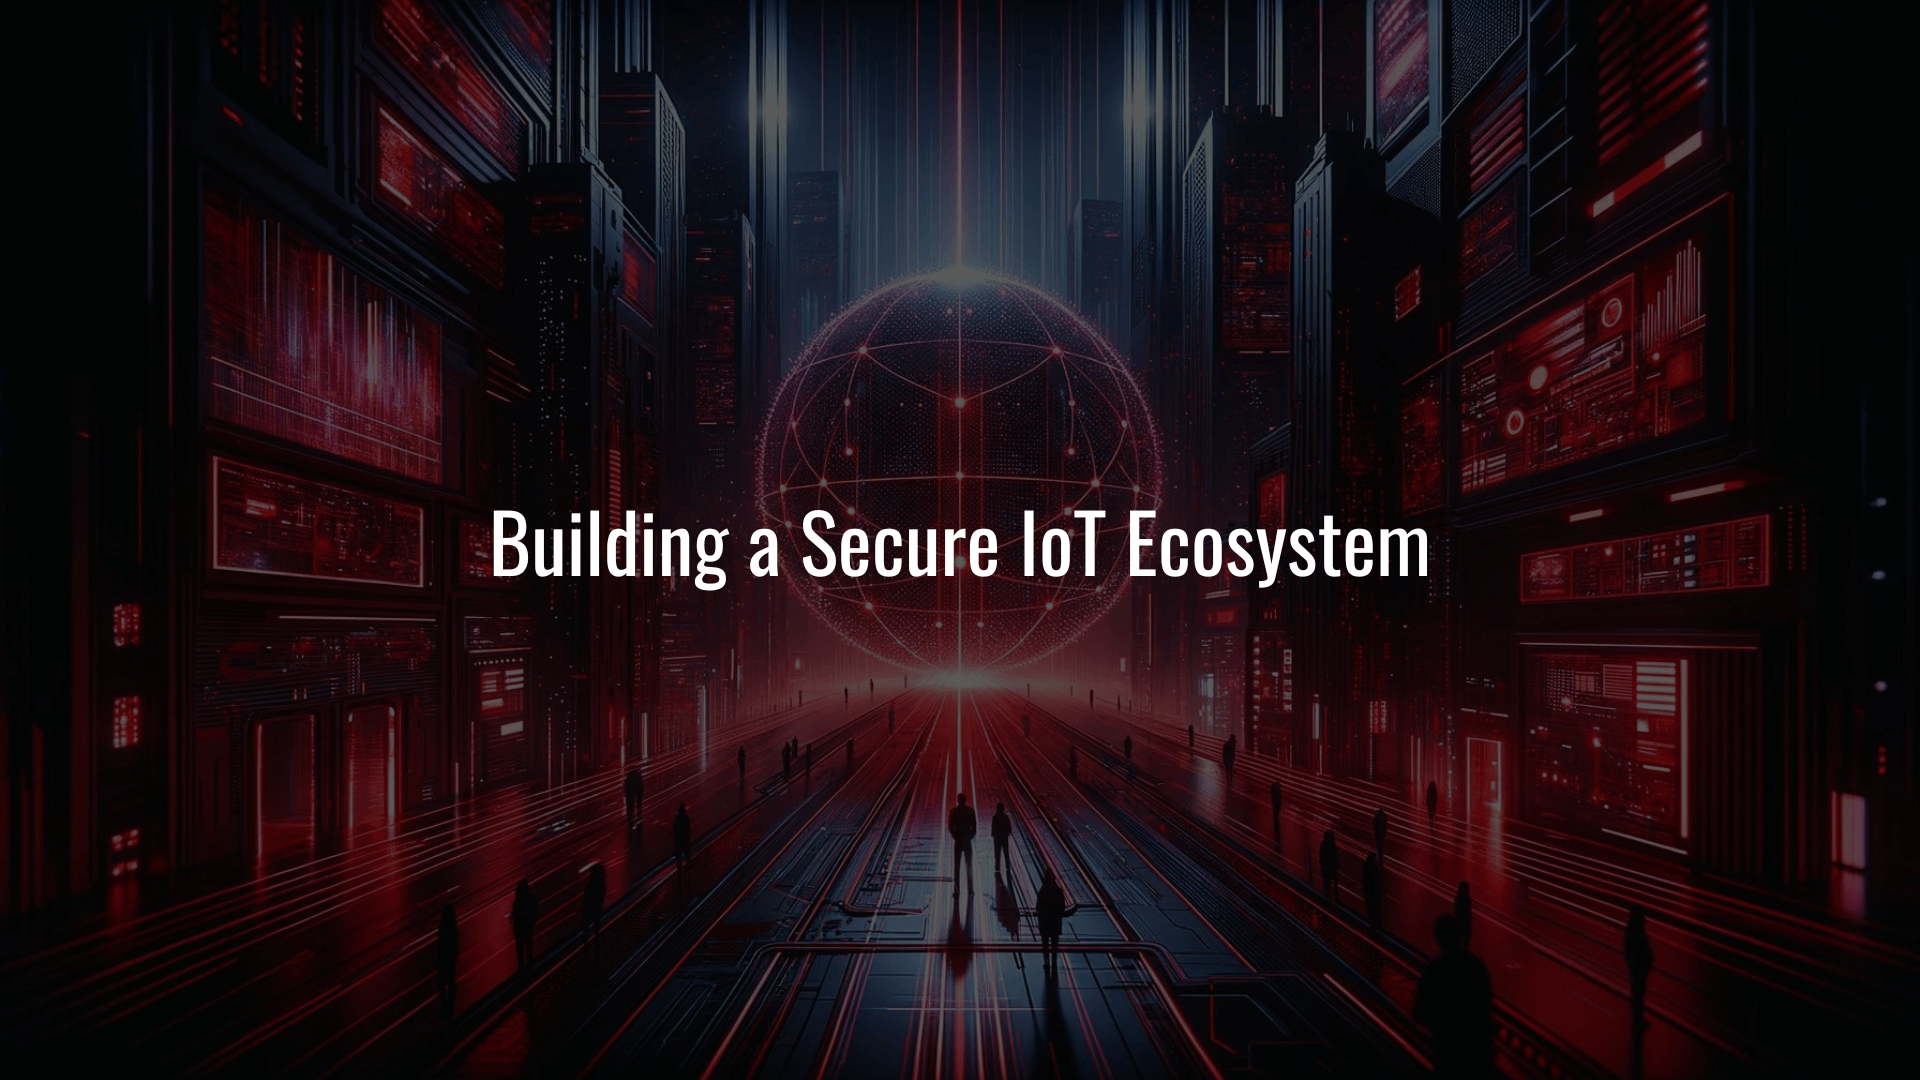 Building a Secure IoT Ecosystem